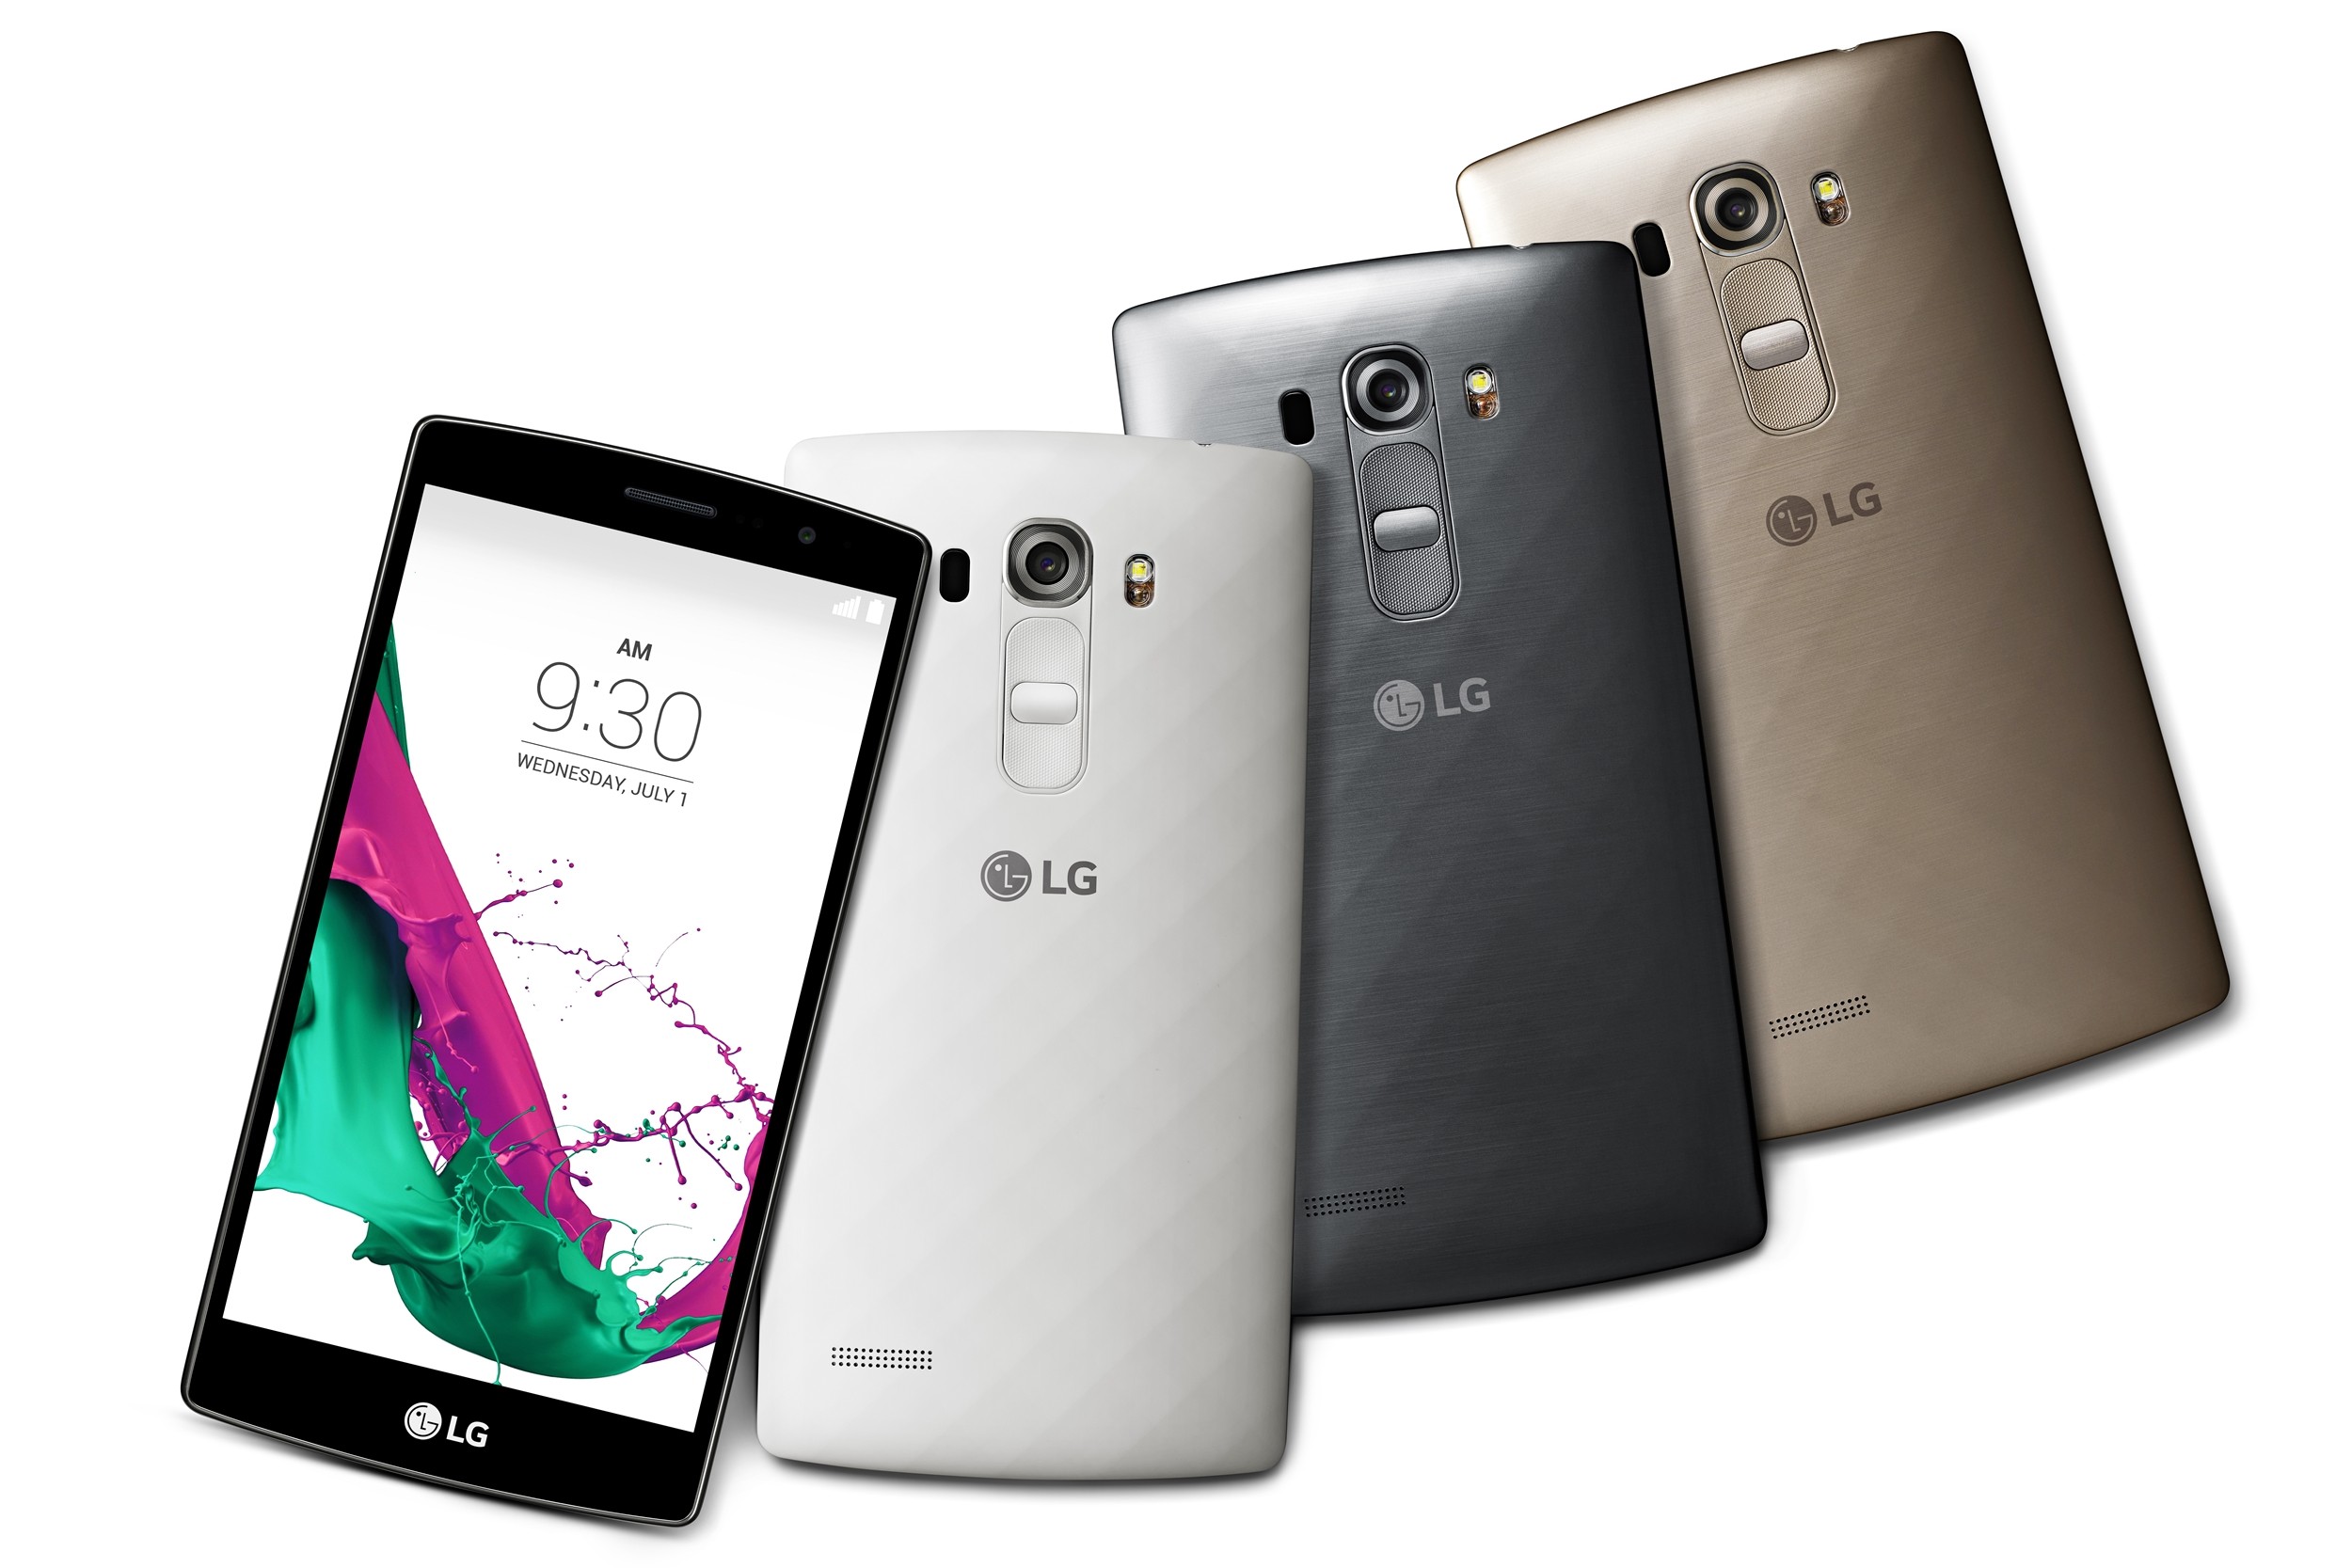 LG G4 BEAT DELIVERS PREMIUM DESIGN, SUPERIOR FEATURES IN A MID-TIER